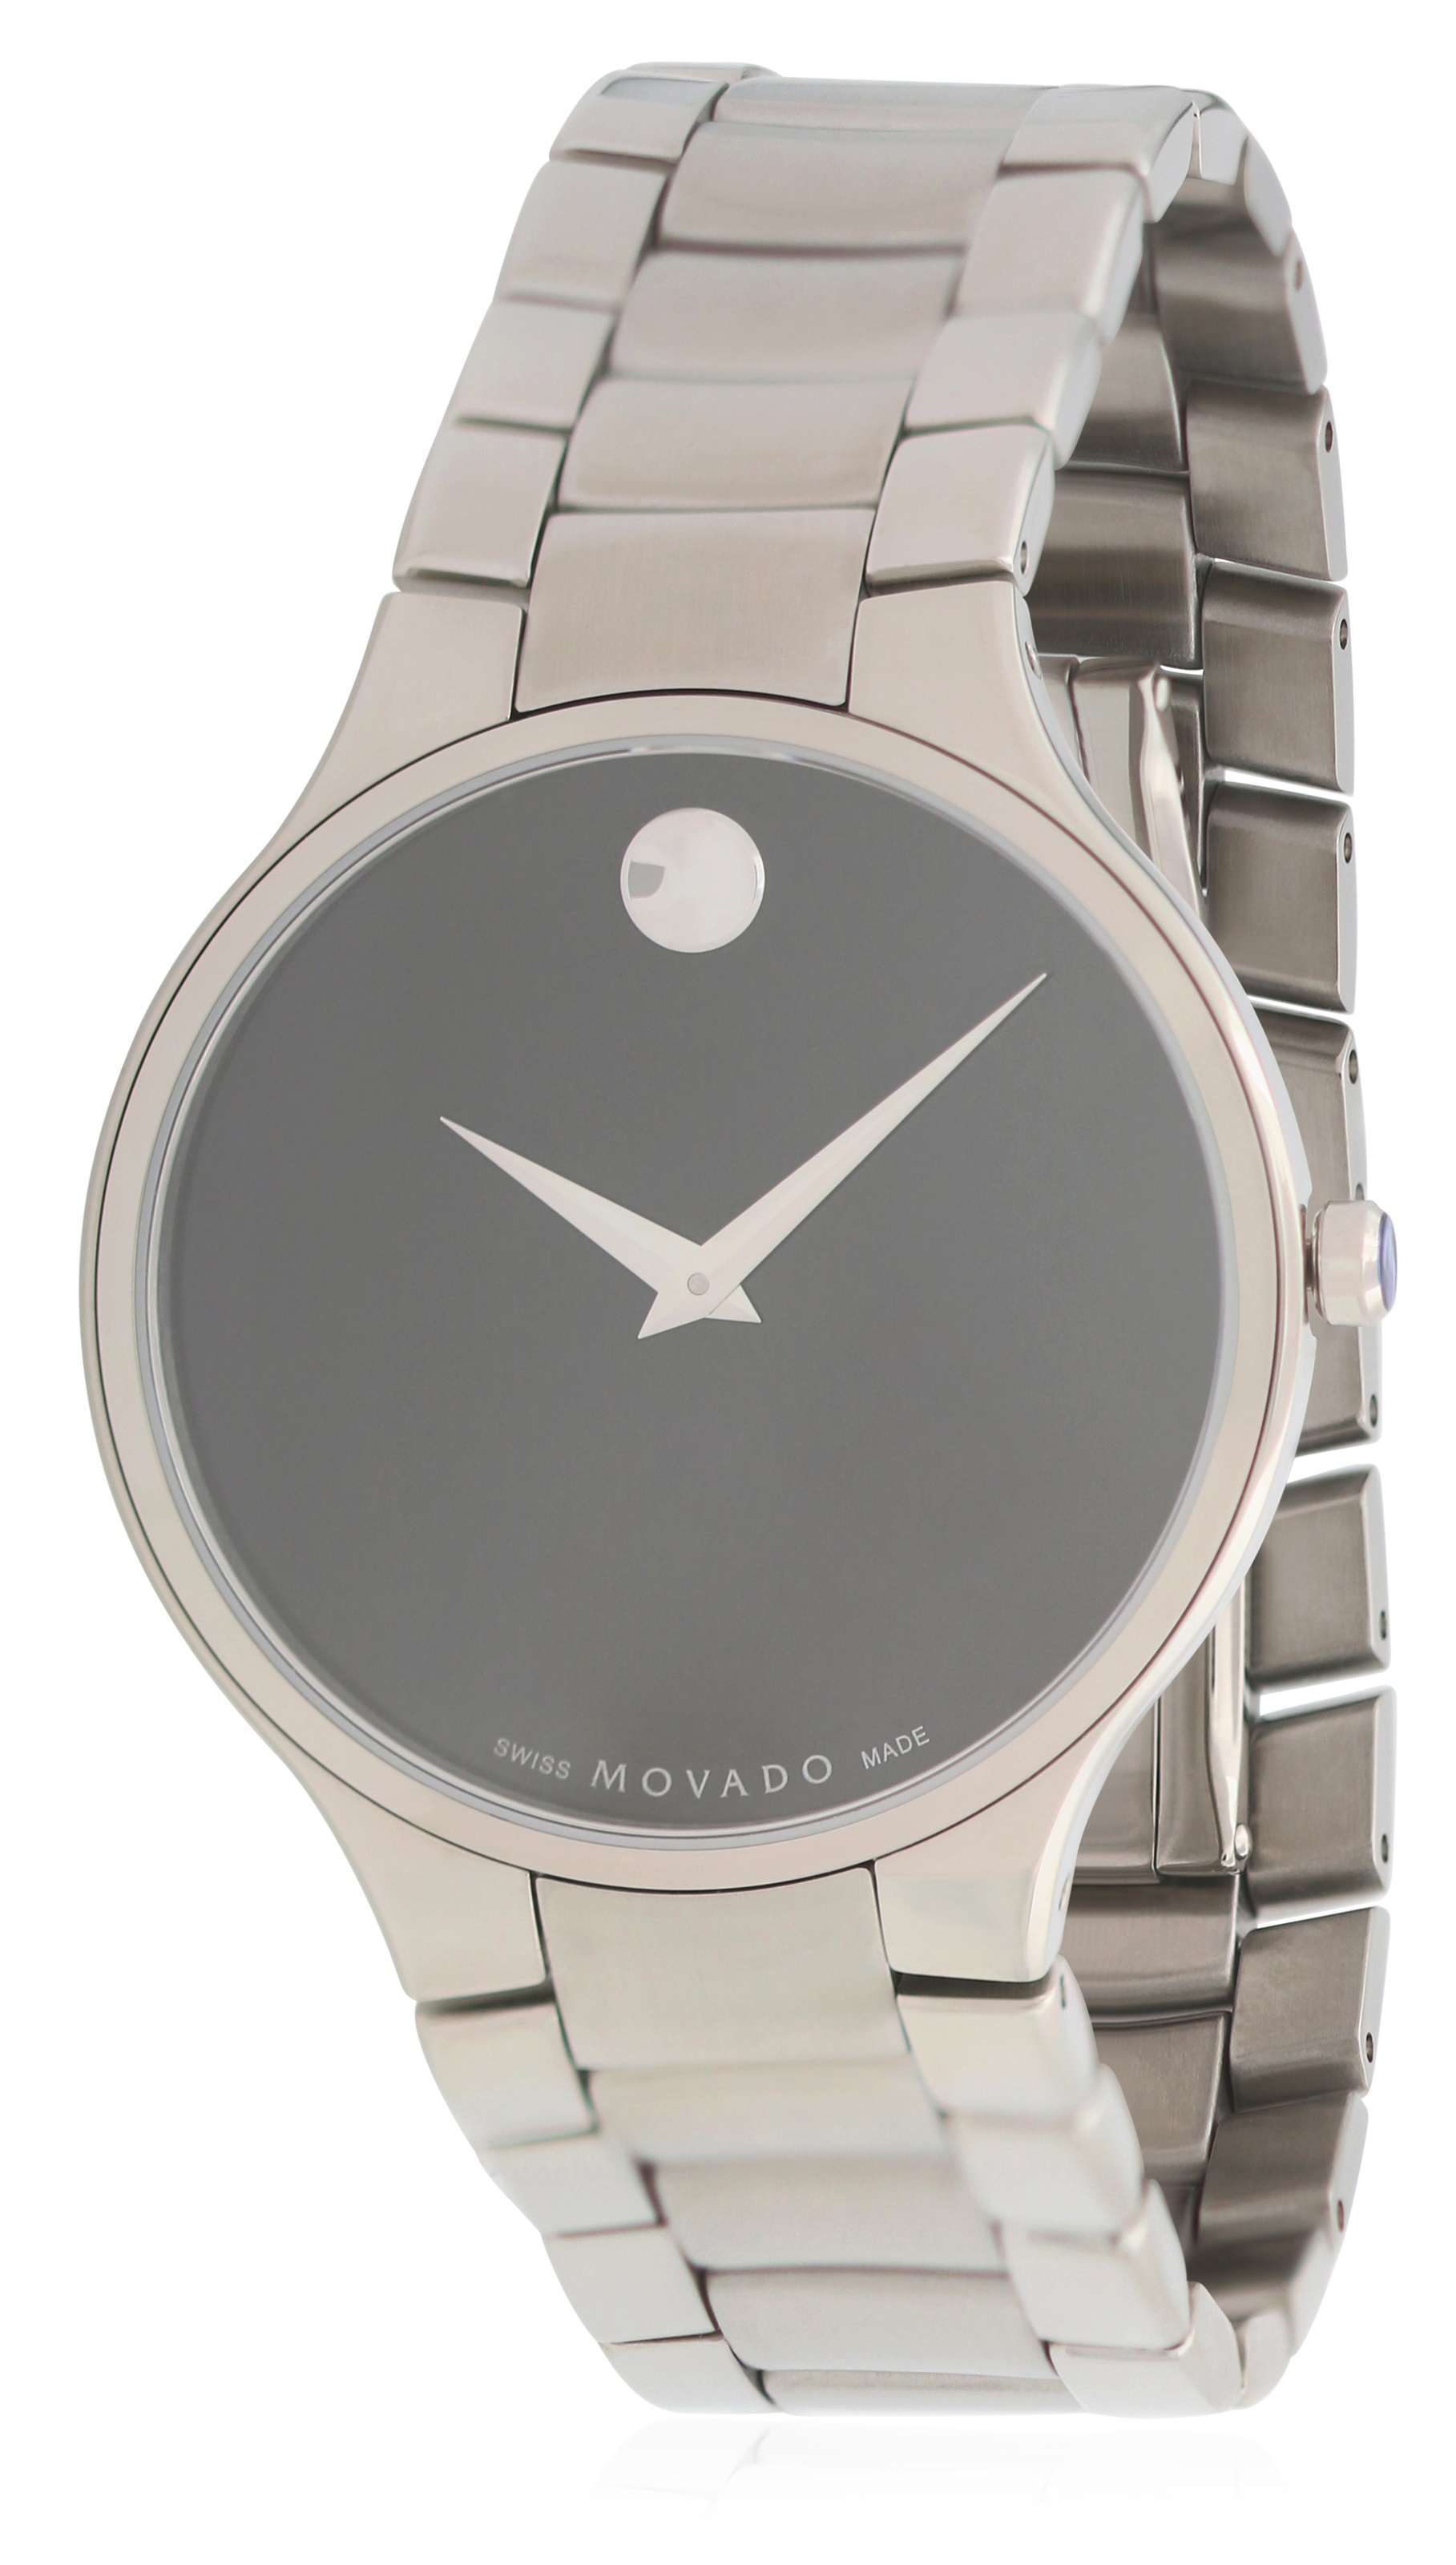 Movado Serio Stainless Steel Mens Watch 0607283 885997283649 | eBay